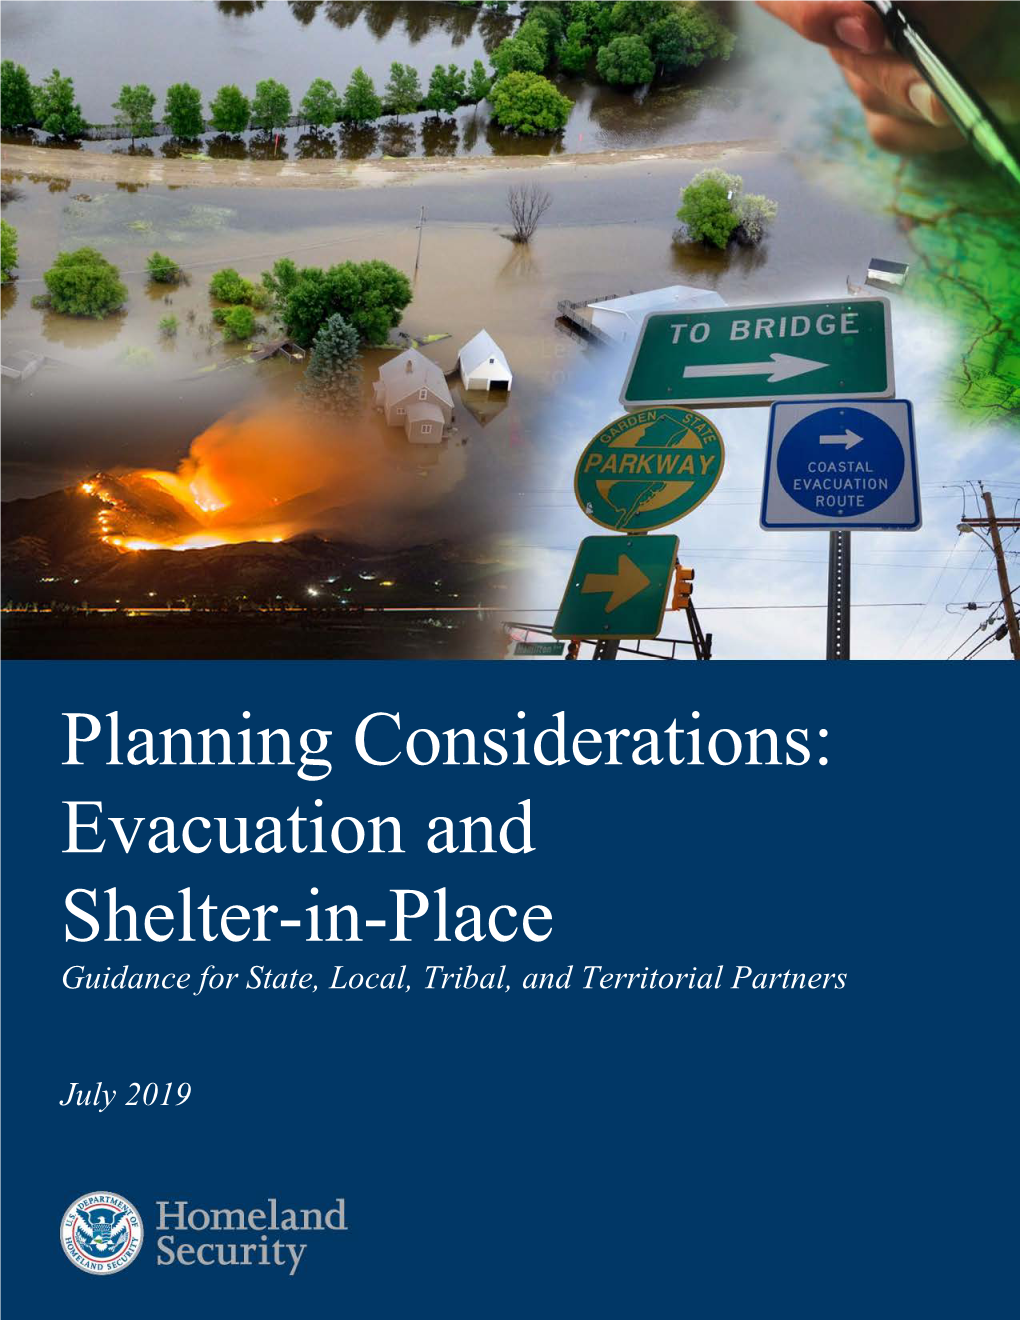 Planning Considerations: Evacuation and Shelter-In-Place Guidance for State, Local, Tribal, and Territorial Partners